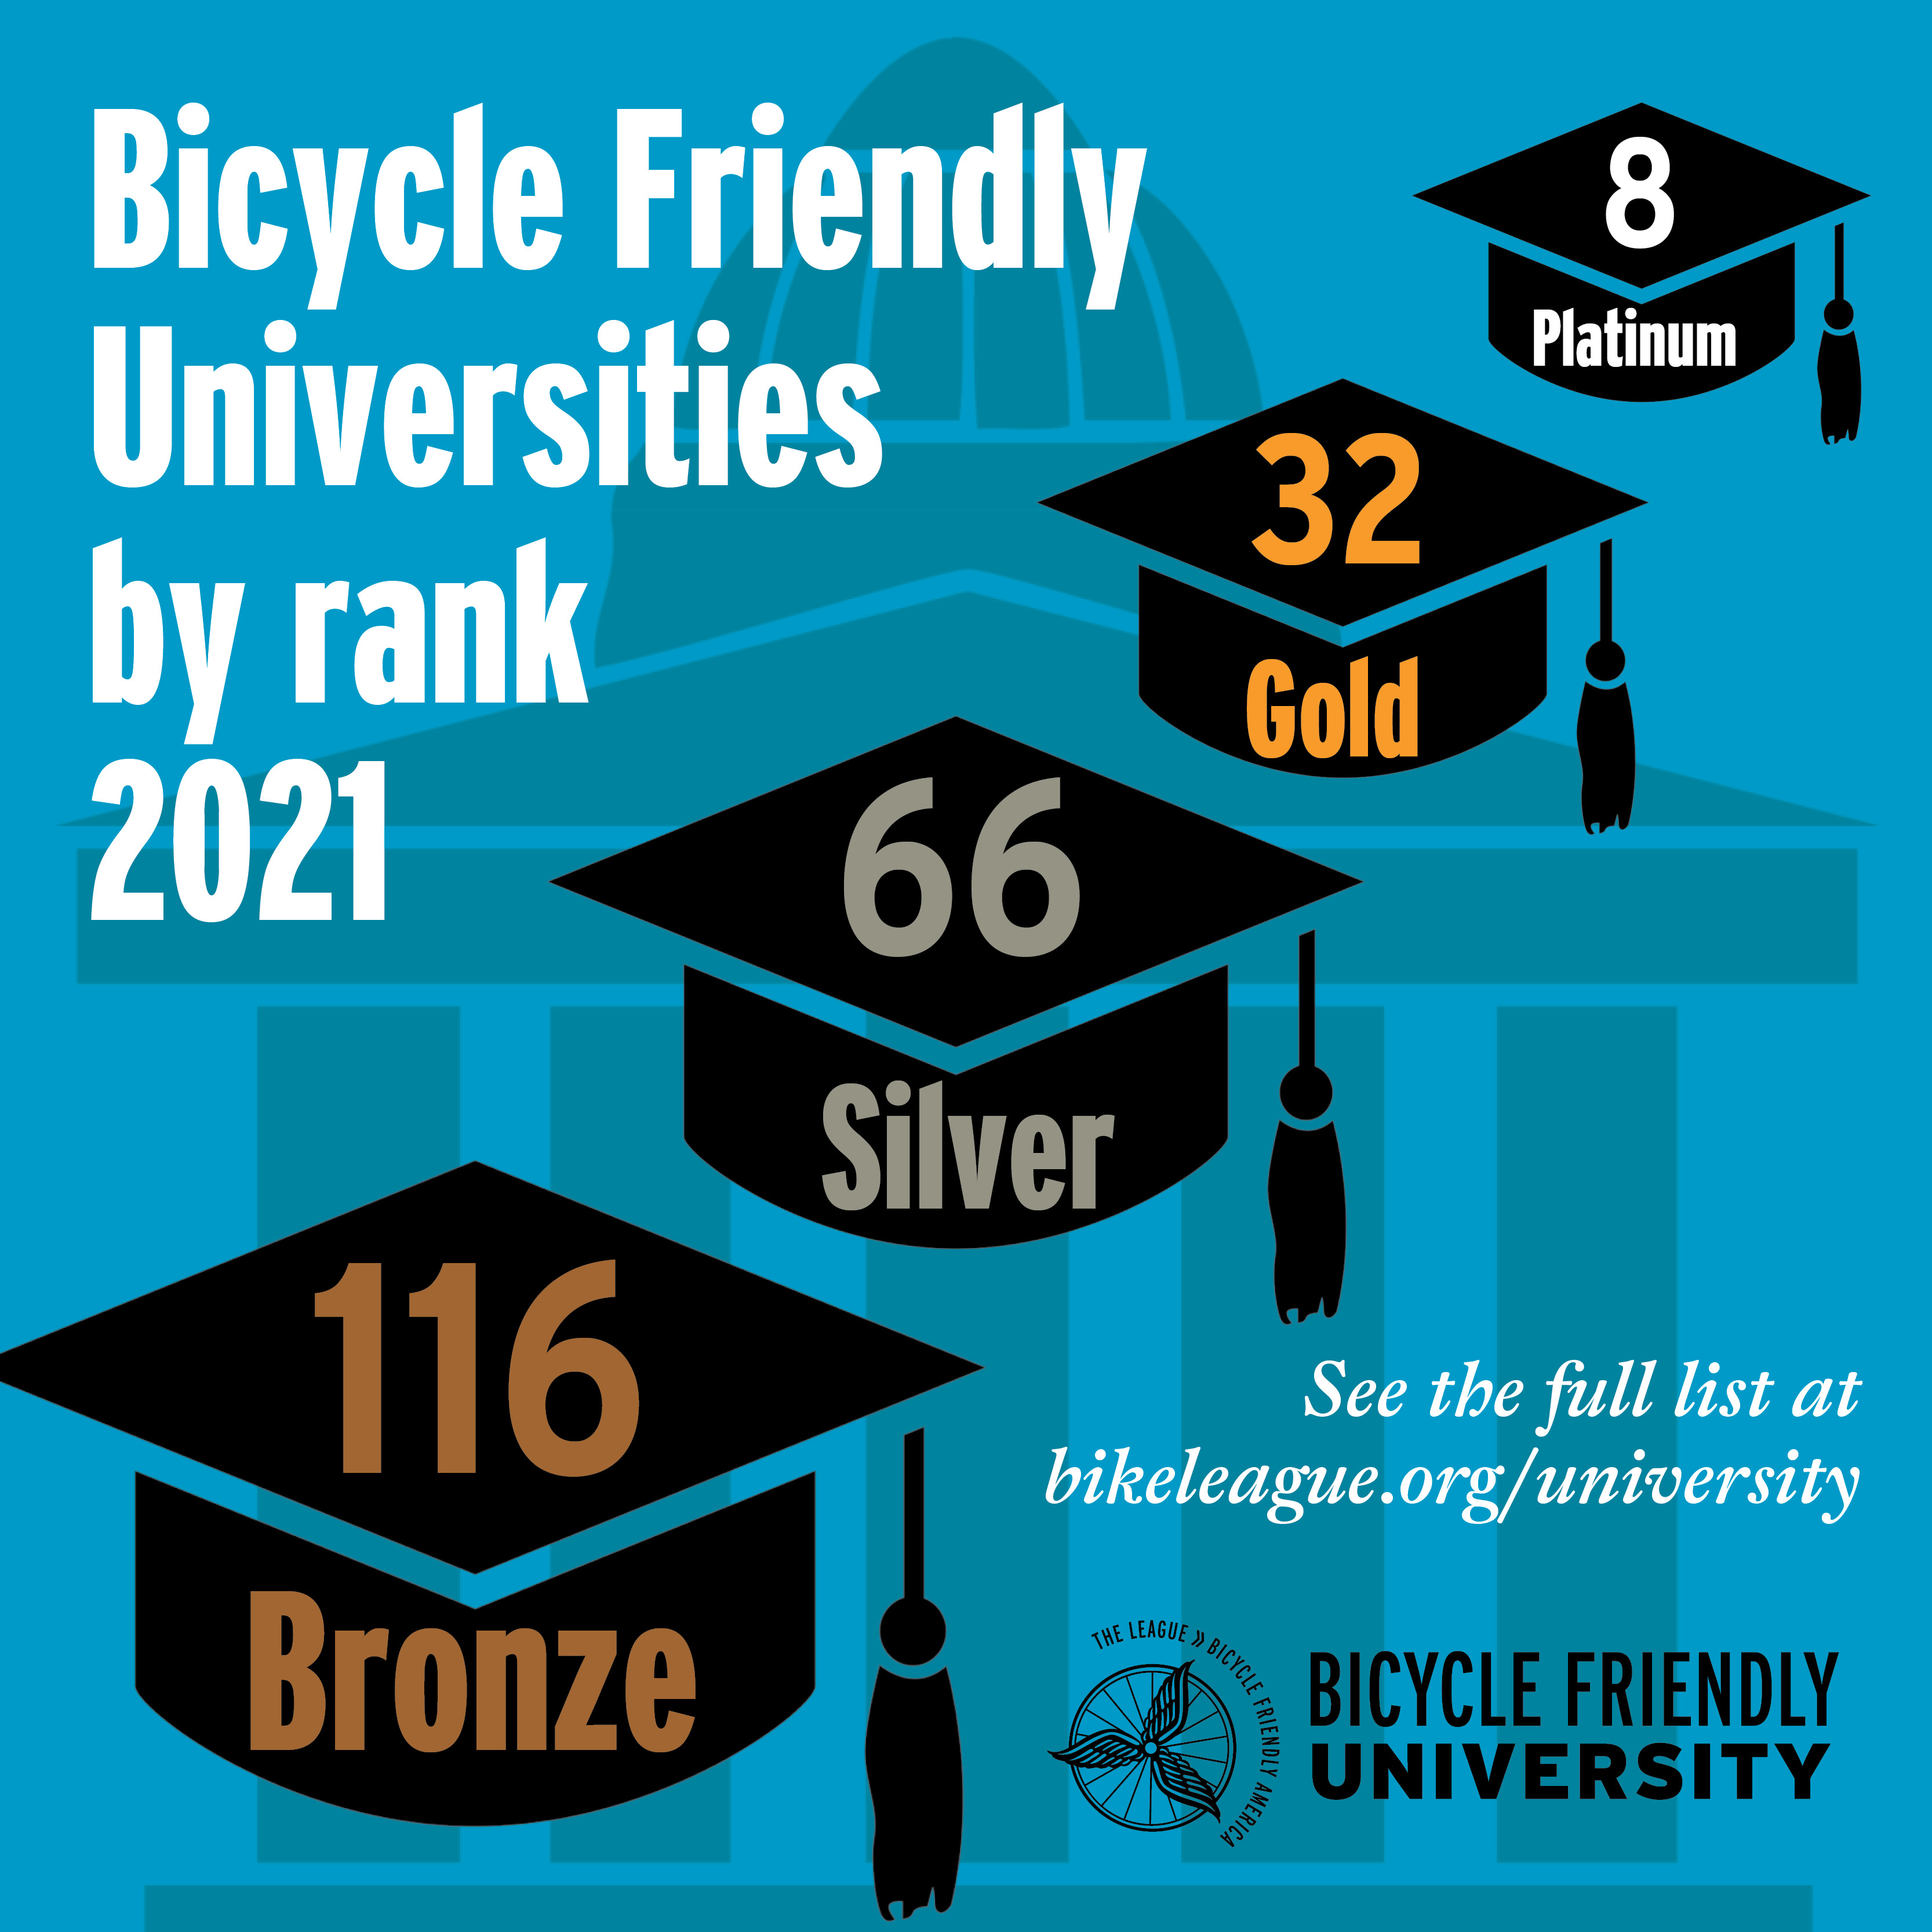 Ranking of bicycle friendly universities in 2021. bronze 116, silver 66, gold 32, and platinum 8